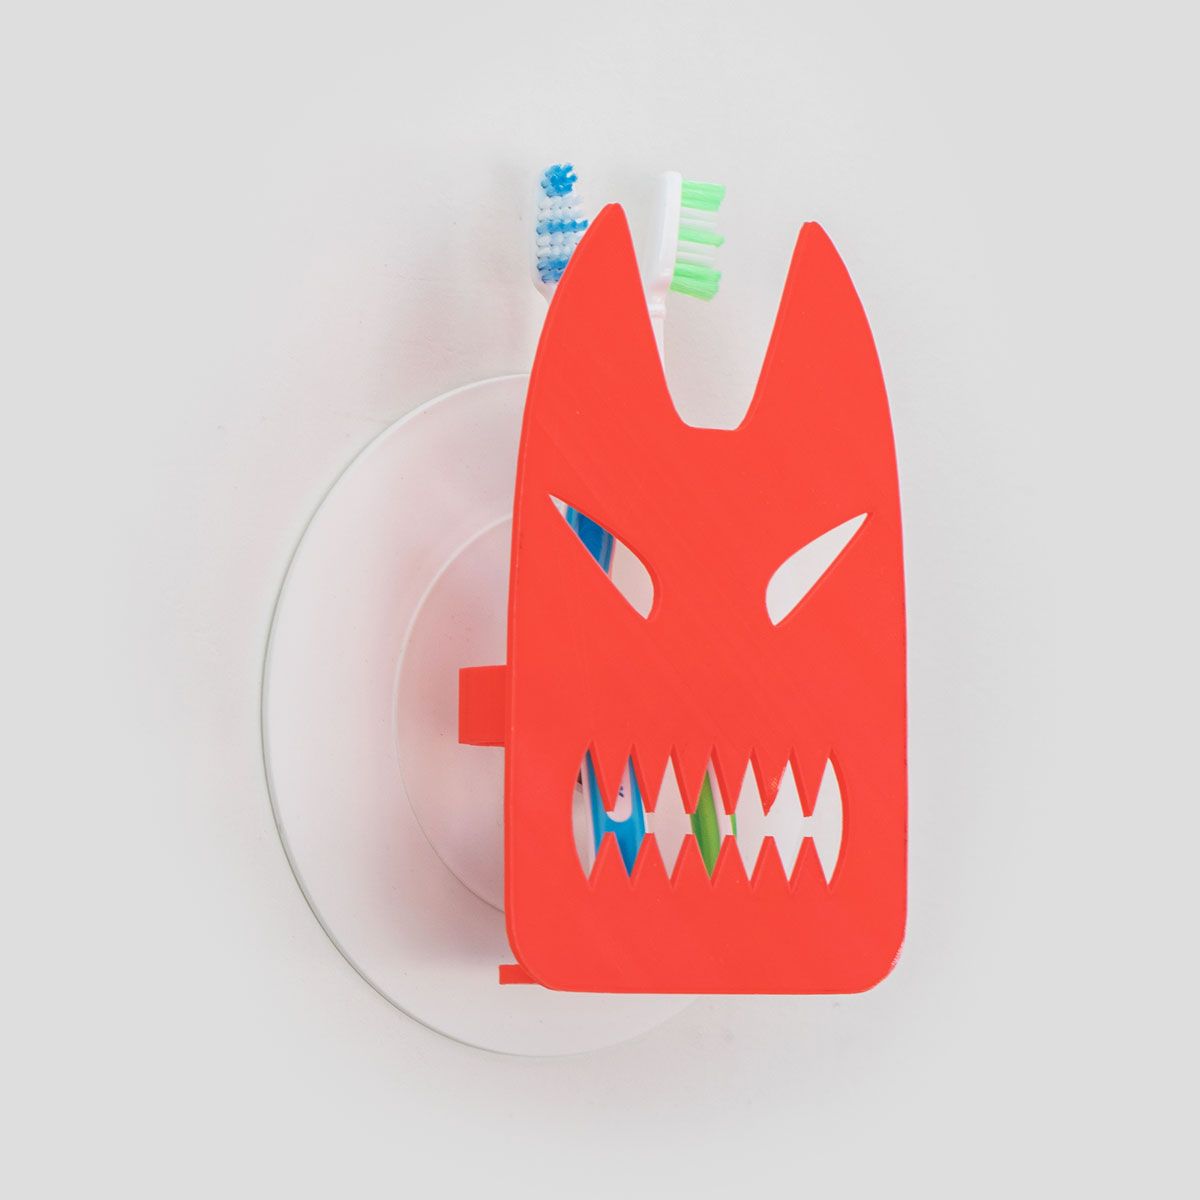 Toothy [Toothbrush Holder]